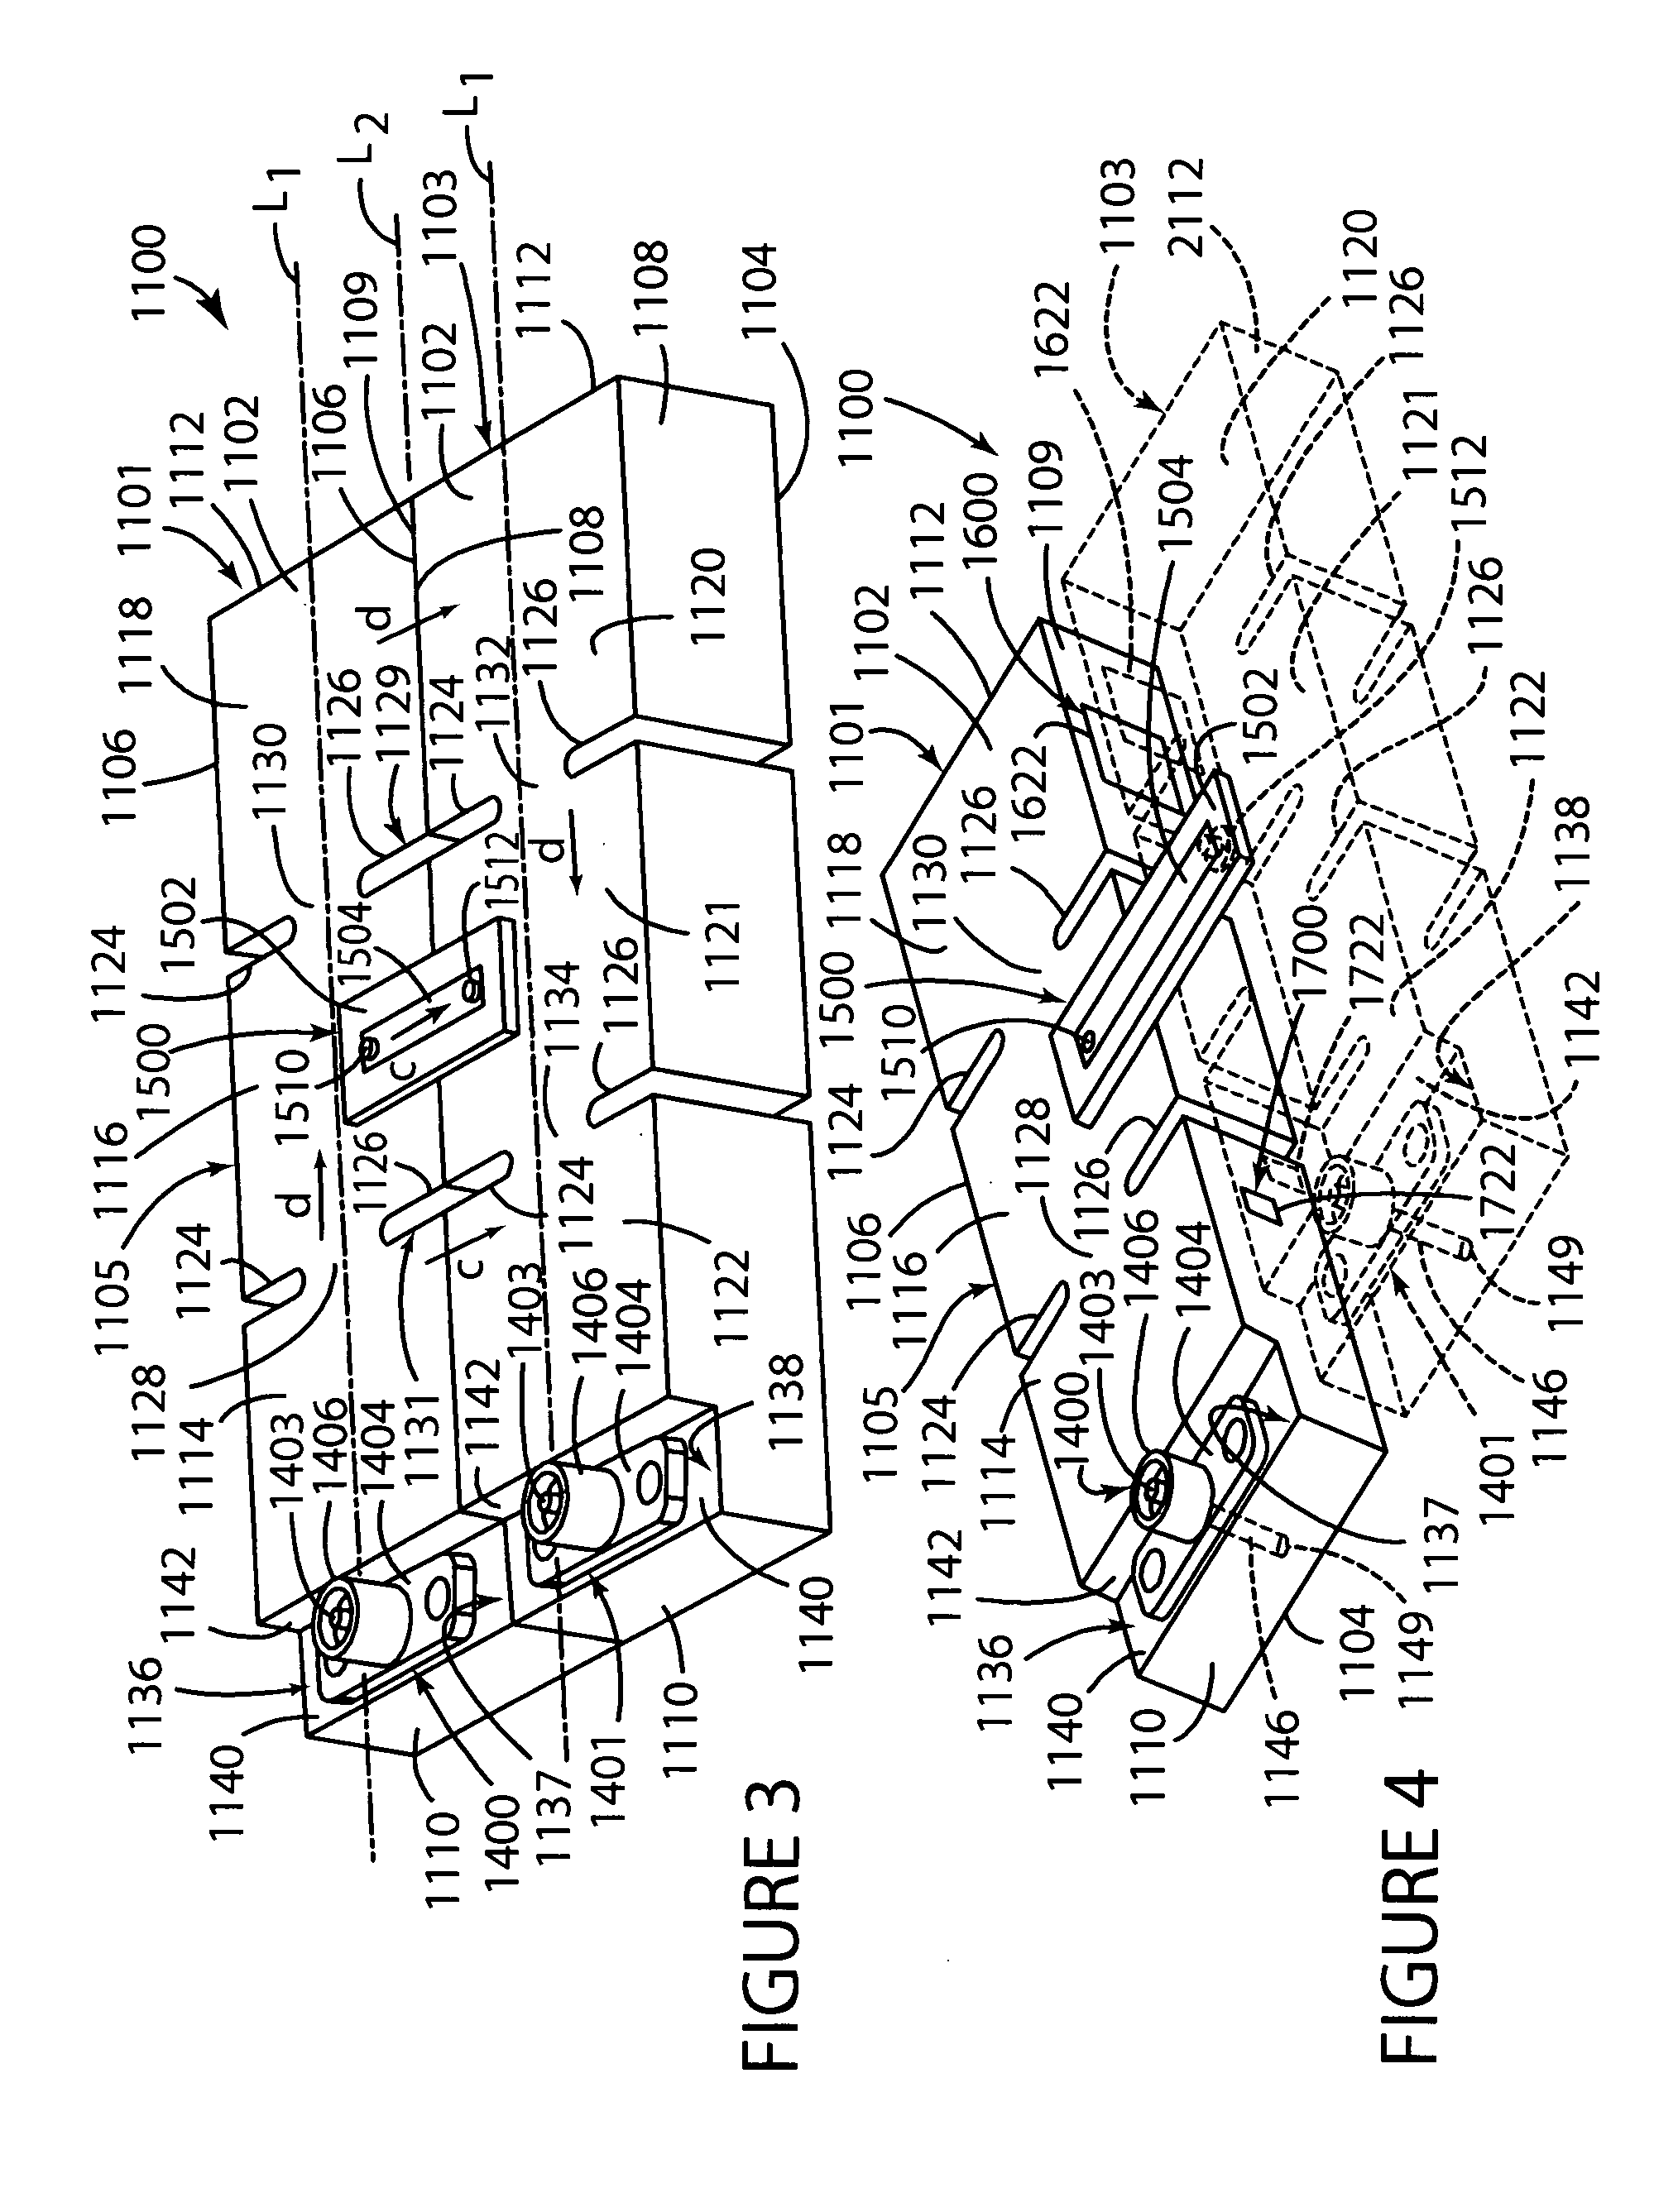 Dielectric waveguide filter with direct coupling and alternative cross-coupling